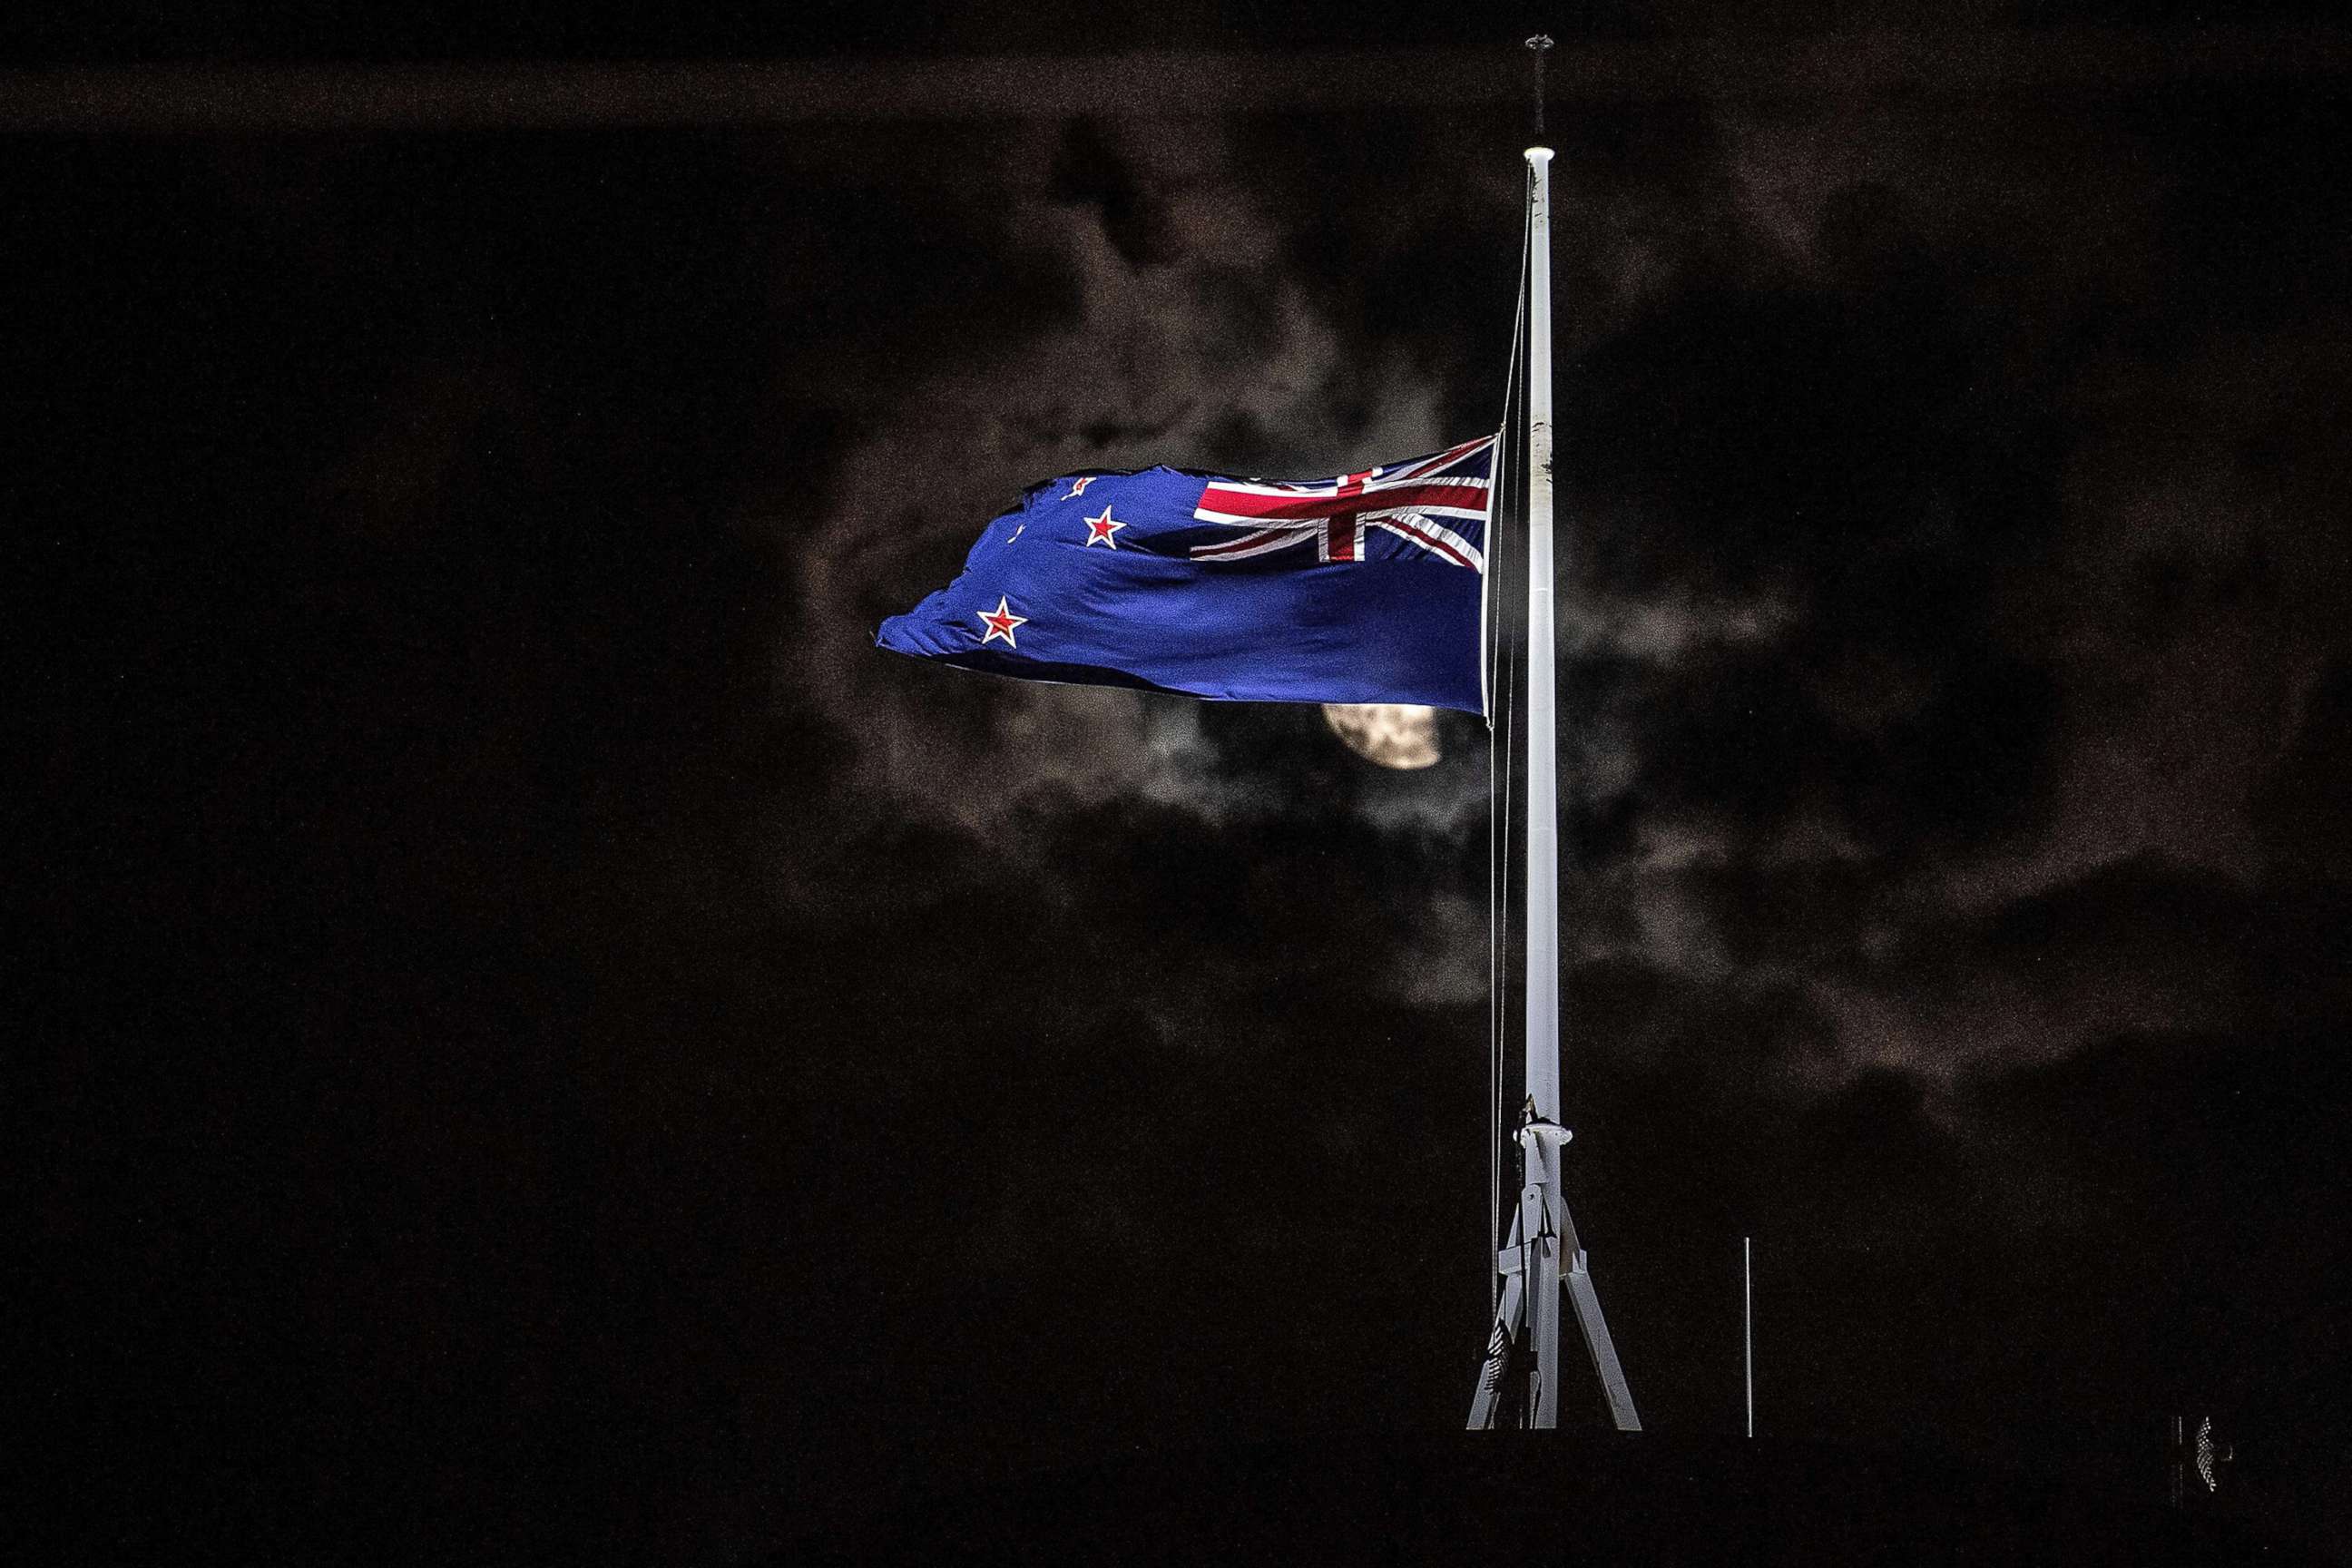 PHOTO: The New Zealand national flag is flown at half-mast on a Parliament building in Wellington, New Zealand, March 15, 2019, after a mass shooting at two mosques in Christchurch.